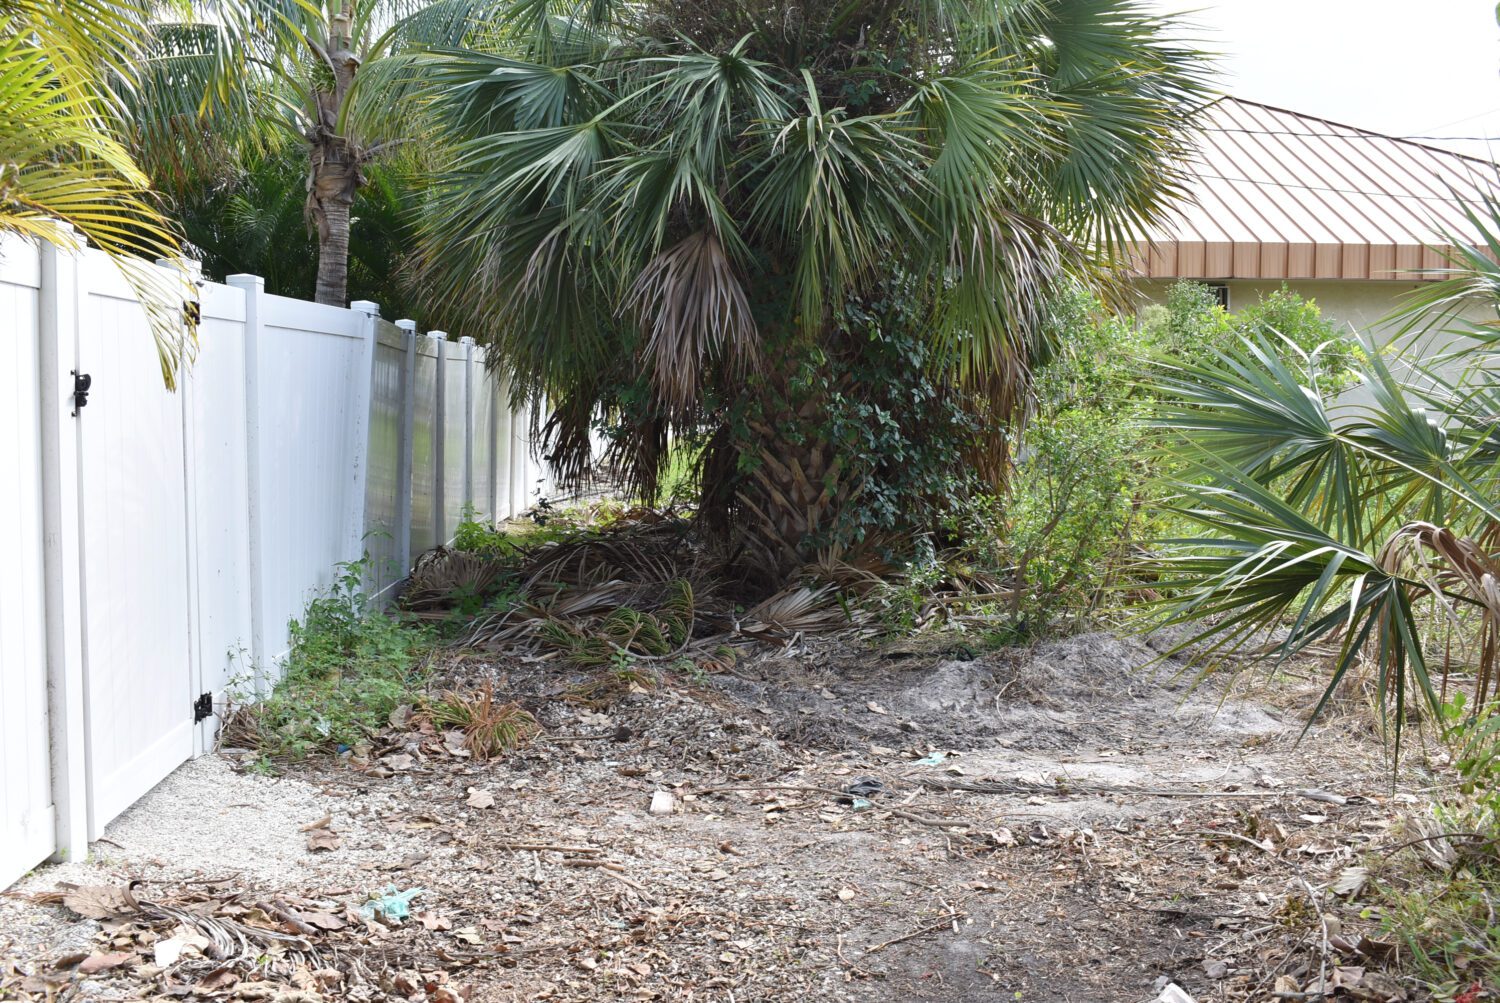 City wants to reestablish obstructed alleys